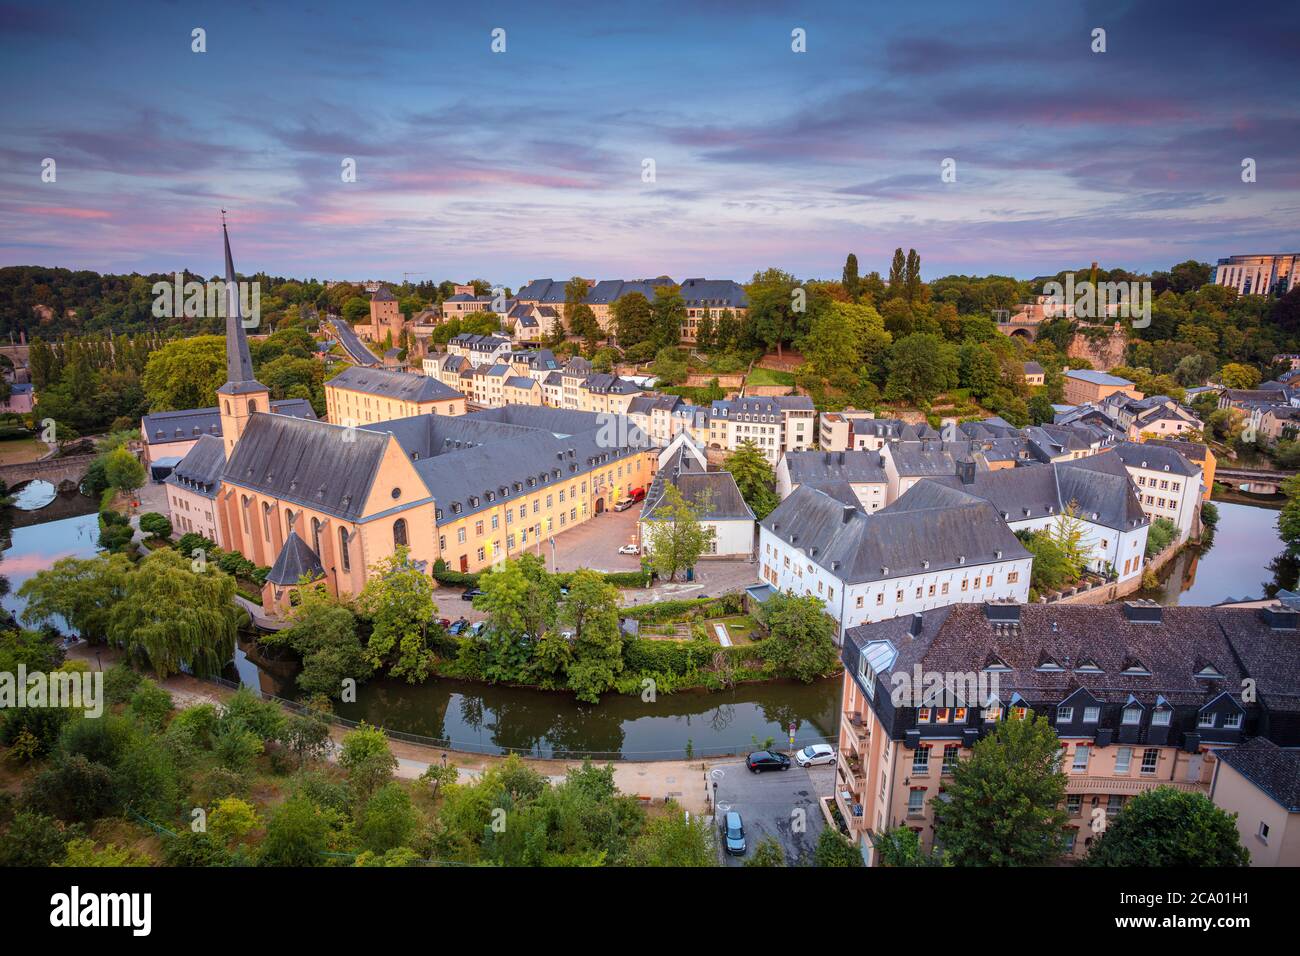 Luxembourg City. Aerial cityscape image of old town Luxembourg during beautiful summer sunset. Stock Photo